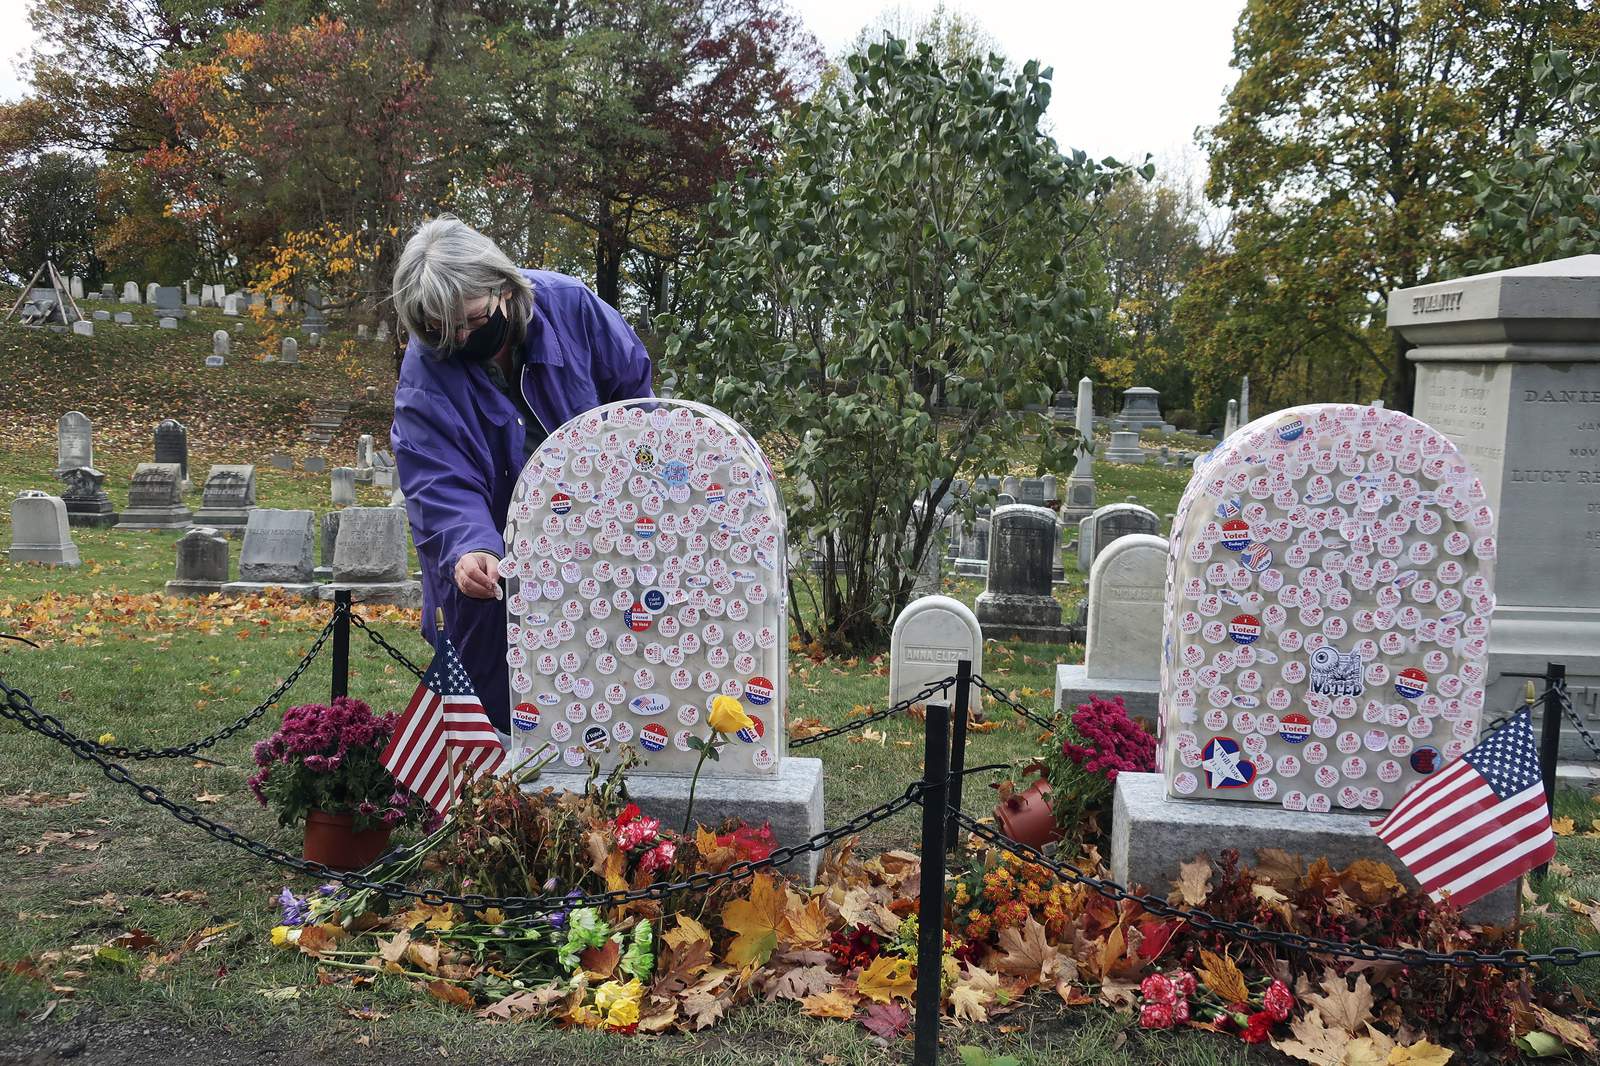 Thank you, Susan B. Anthony: Gravesite sticker tradition continues, now with a shield